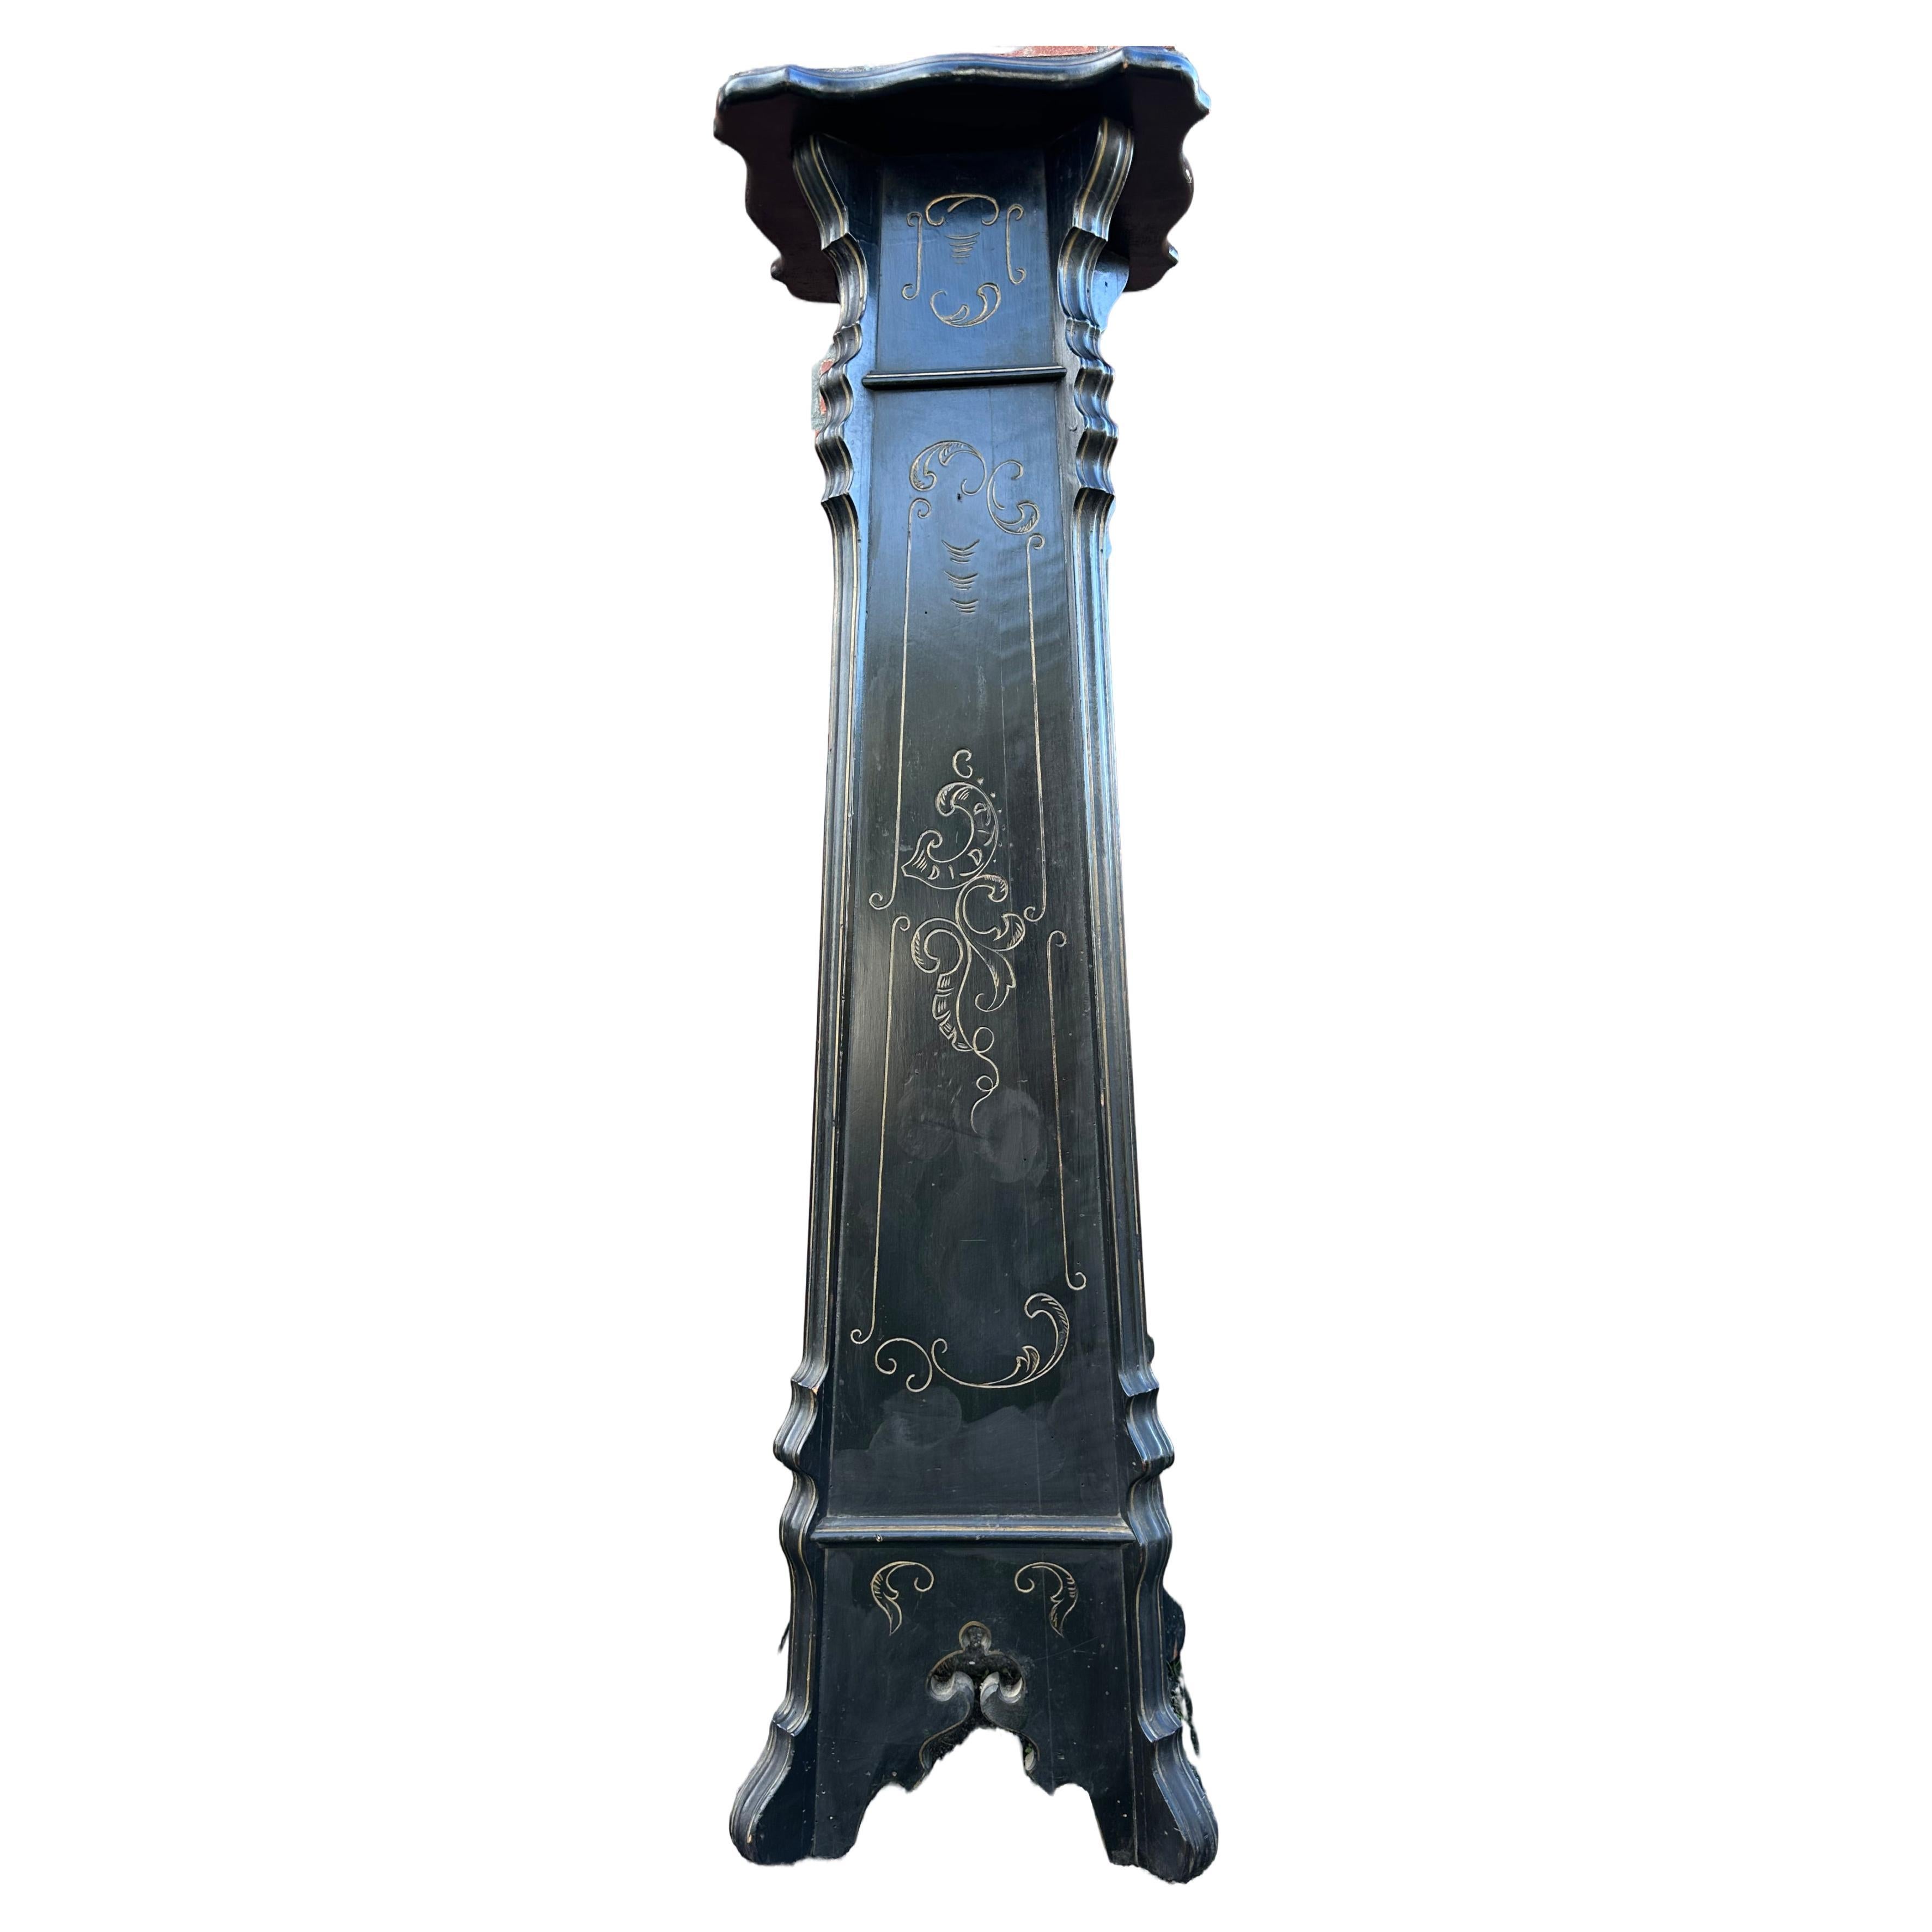 Wonderful column for displaying a work of art or otherwise.

This antique and attractive design pedestal is perfect for showcasing an antique sculpture, vase or bust. Most colors will contrast beautifully against the fully ebonized, black surface of